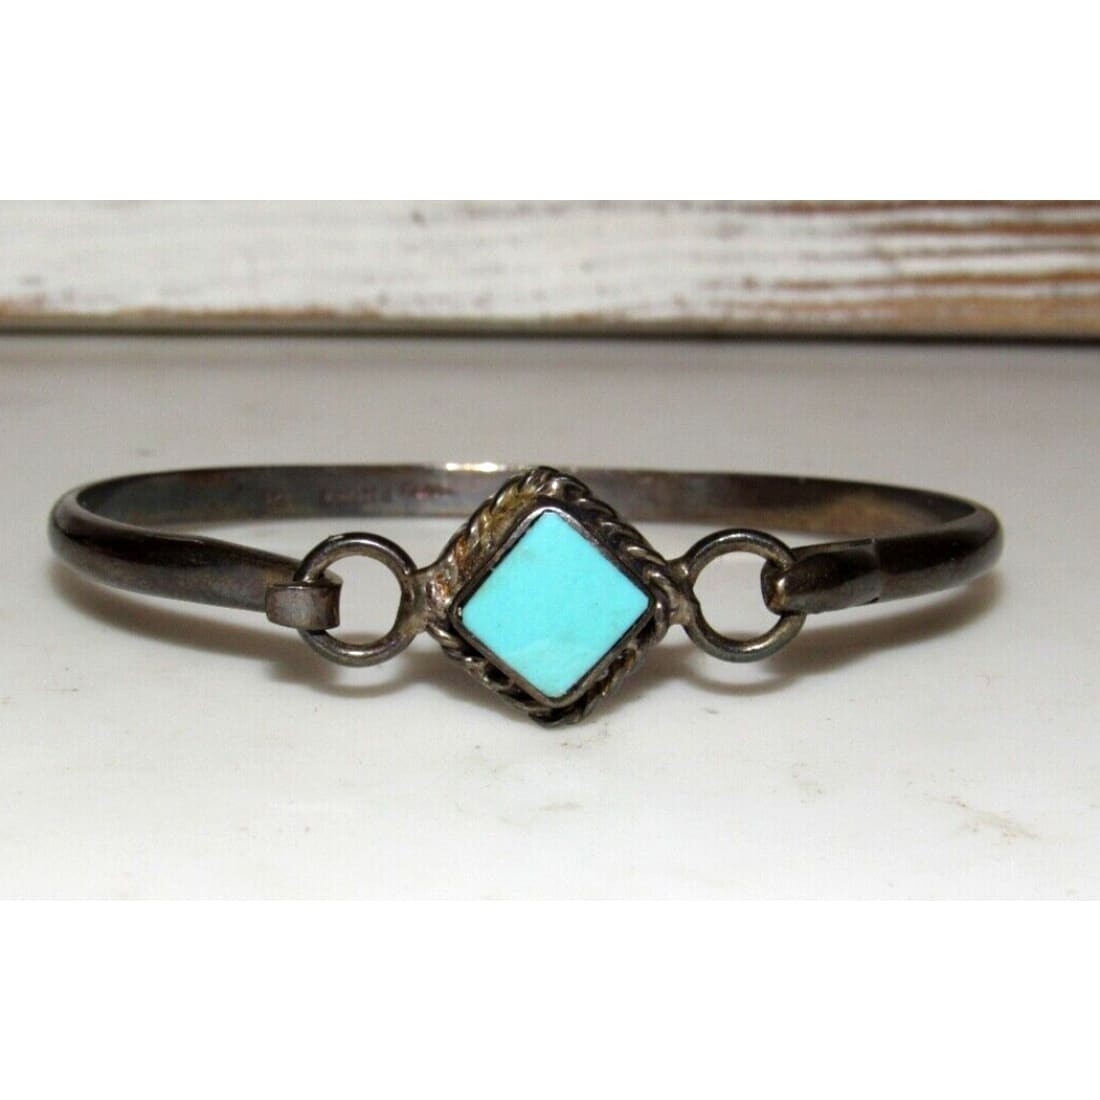 VTG Taxco Mexico Turquoise Bangle Bracelet Sterling Silver